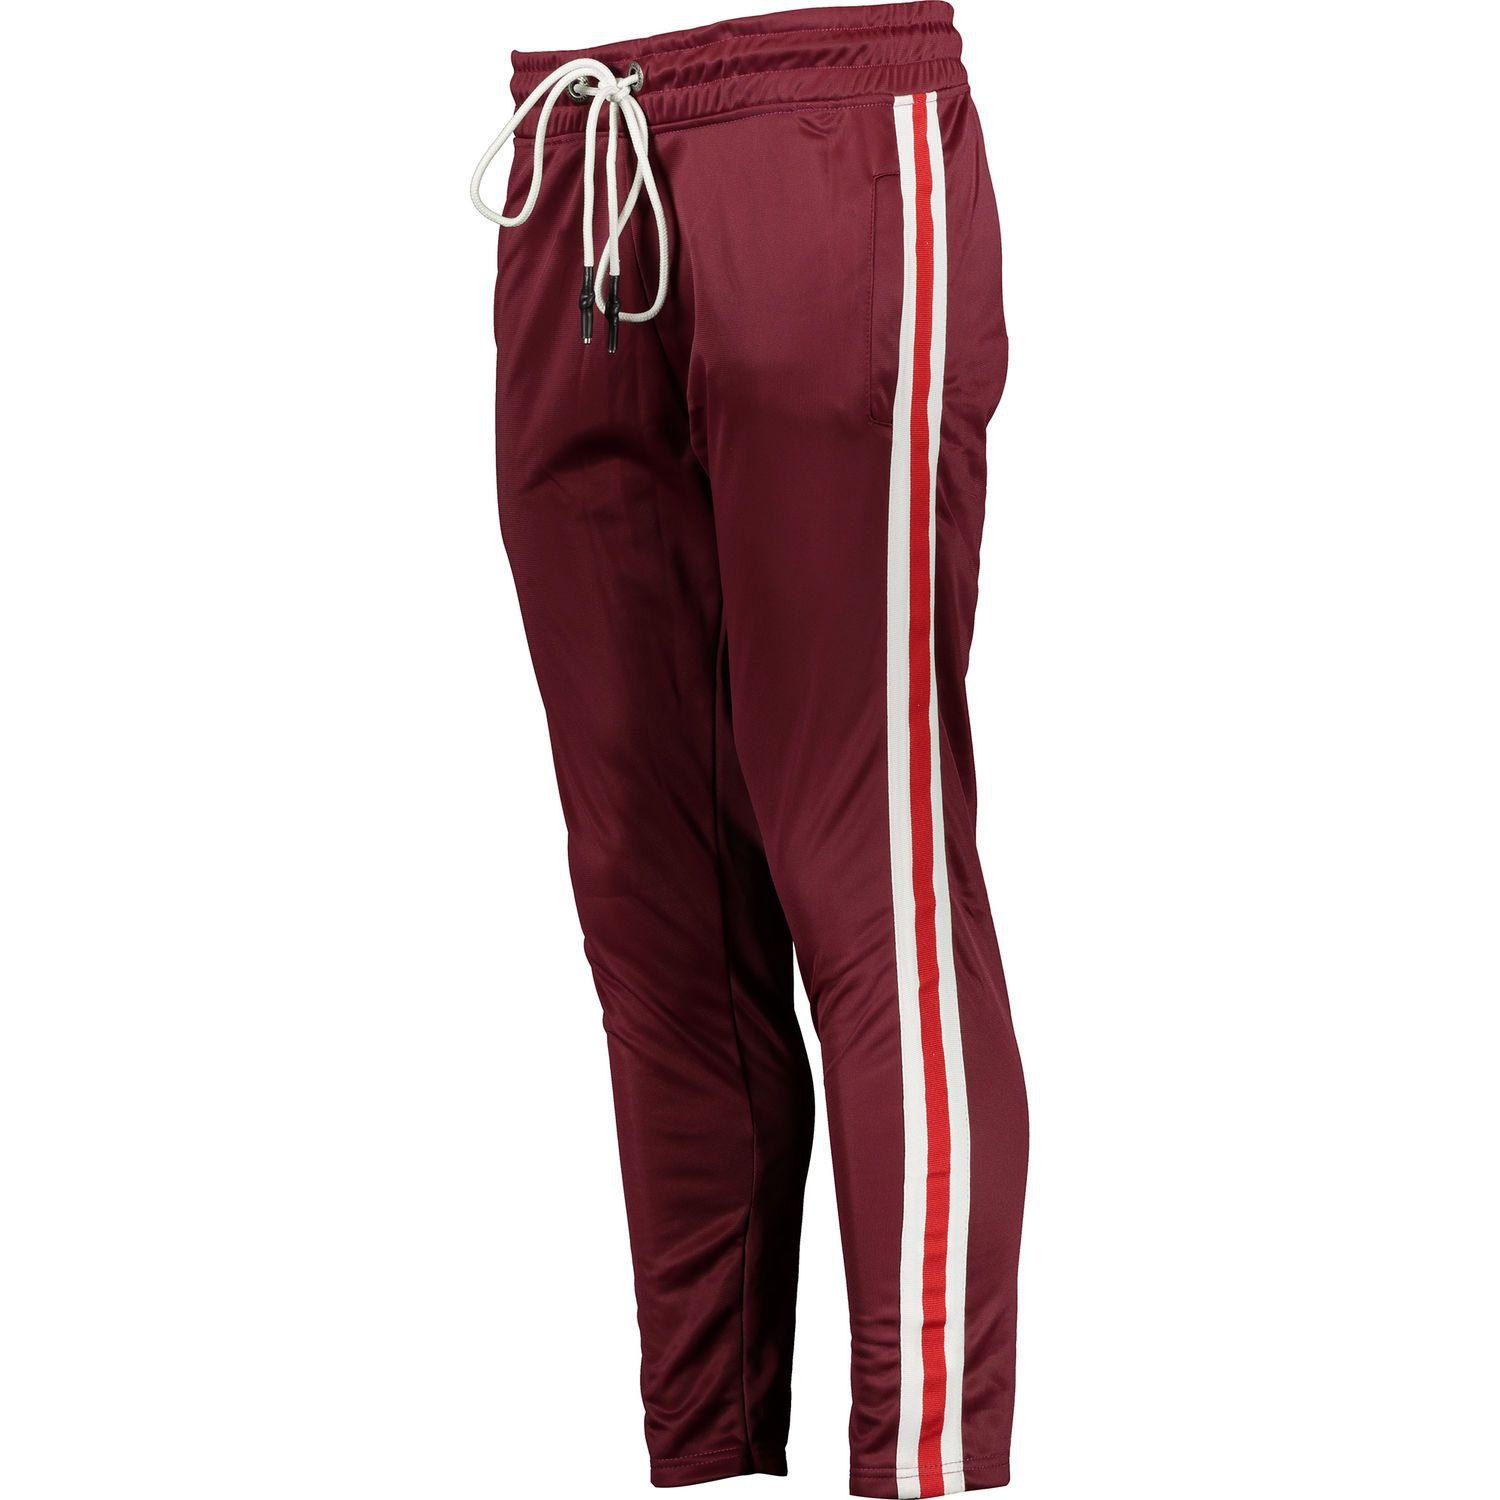 Burgundy with Red Stripe Logo - Burgundy Red Stripe Joggers - Joggers - Clothing - Men - TK Maxx